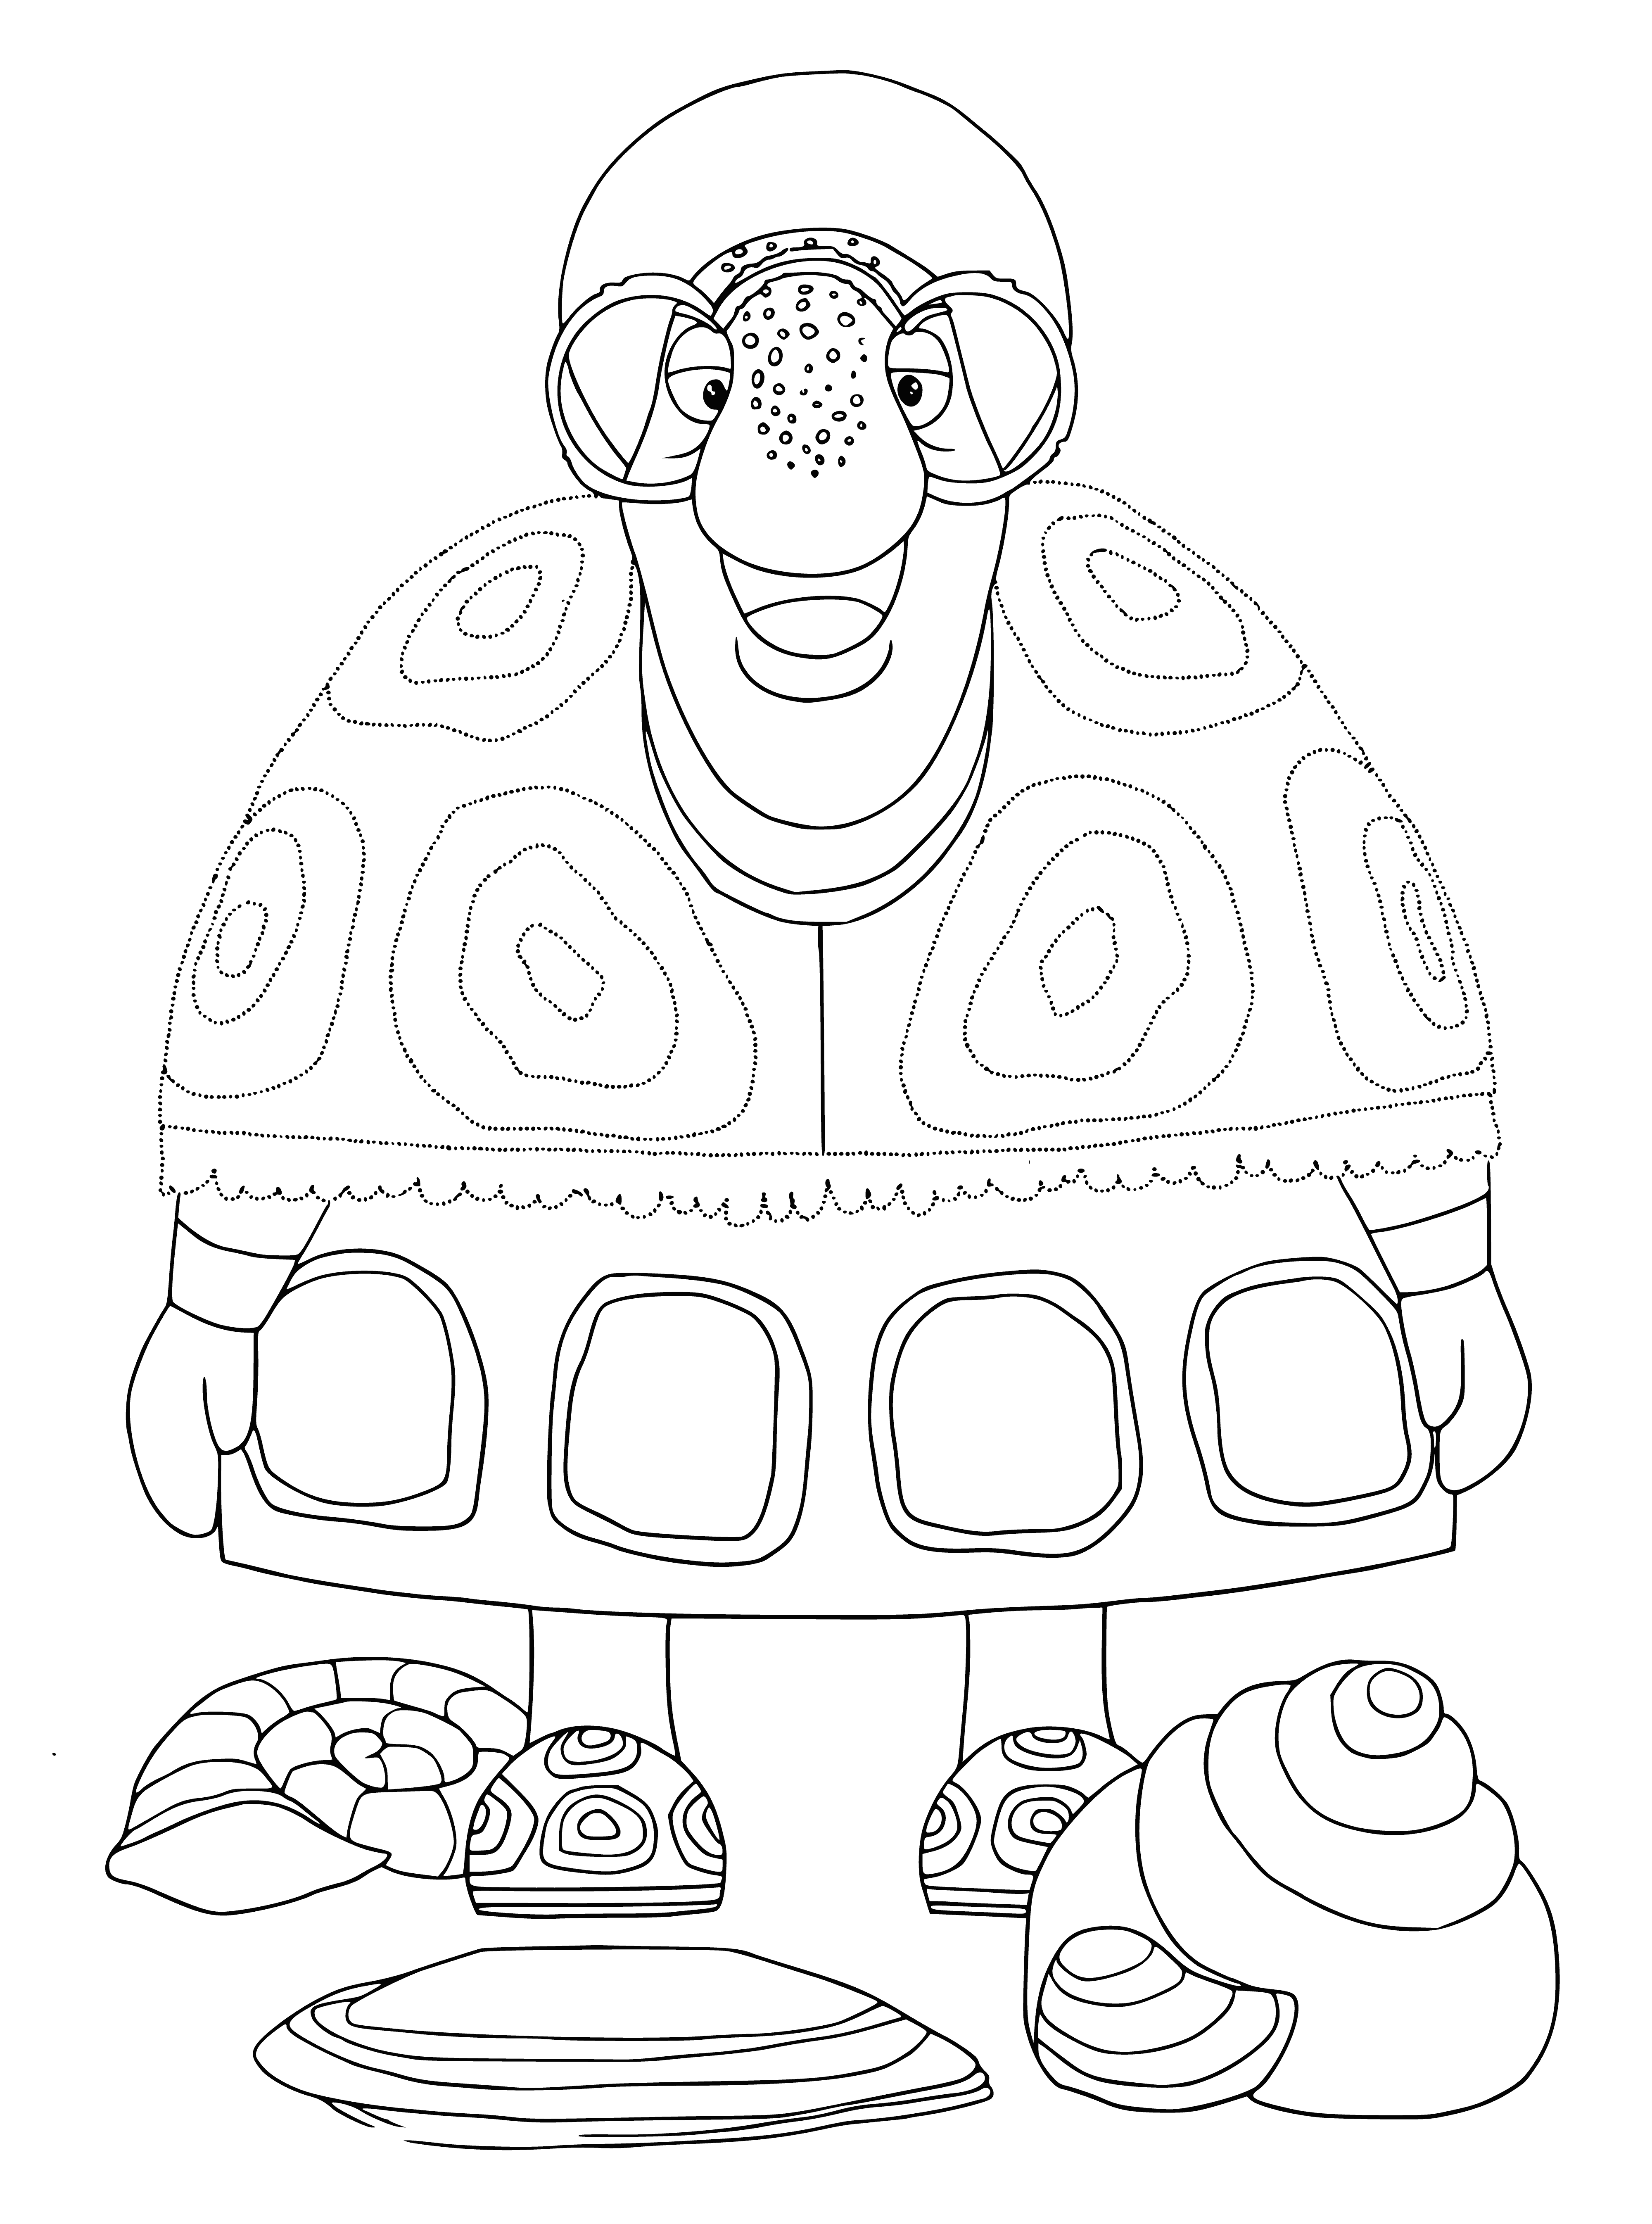 coloring page: Luntik and four turtles sitting on a log near a pond. Luntik has two ears, two eyes, and a nose. He's wearing red and blue. Two turtles on the log, one on Luntik's lap, and one in the water. #Luntik #Turtles